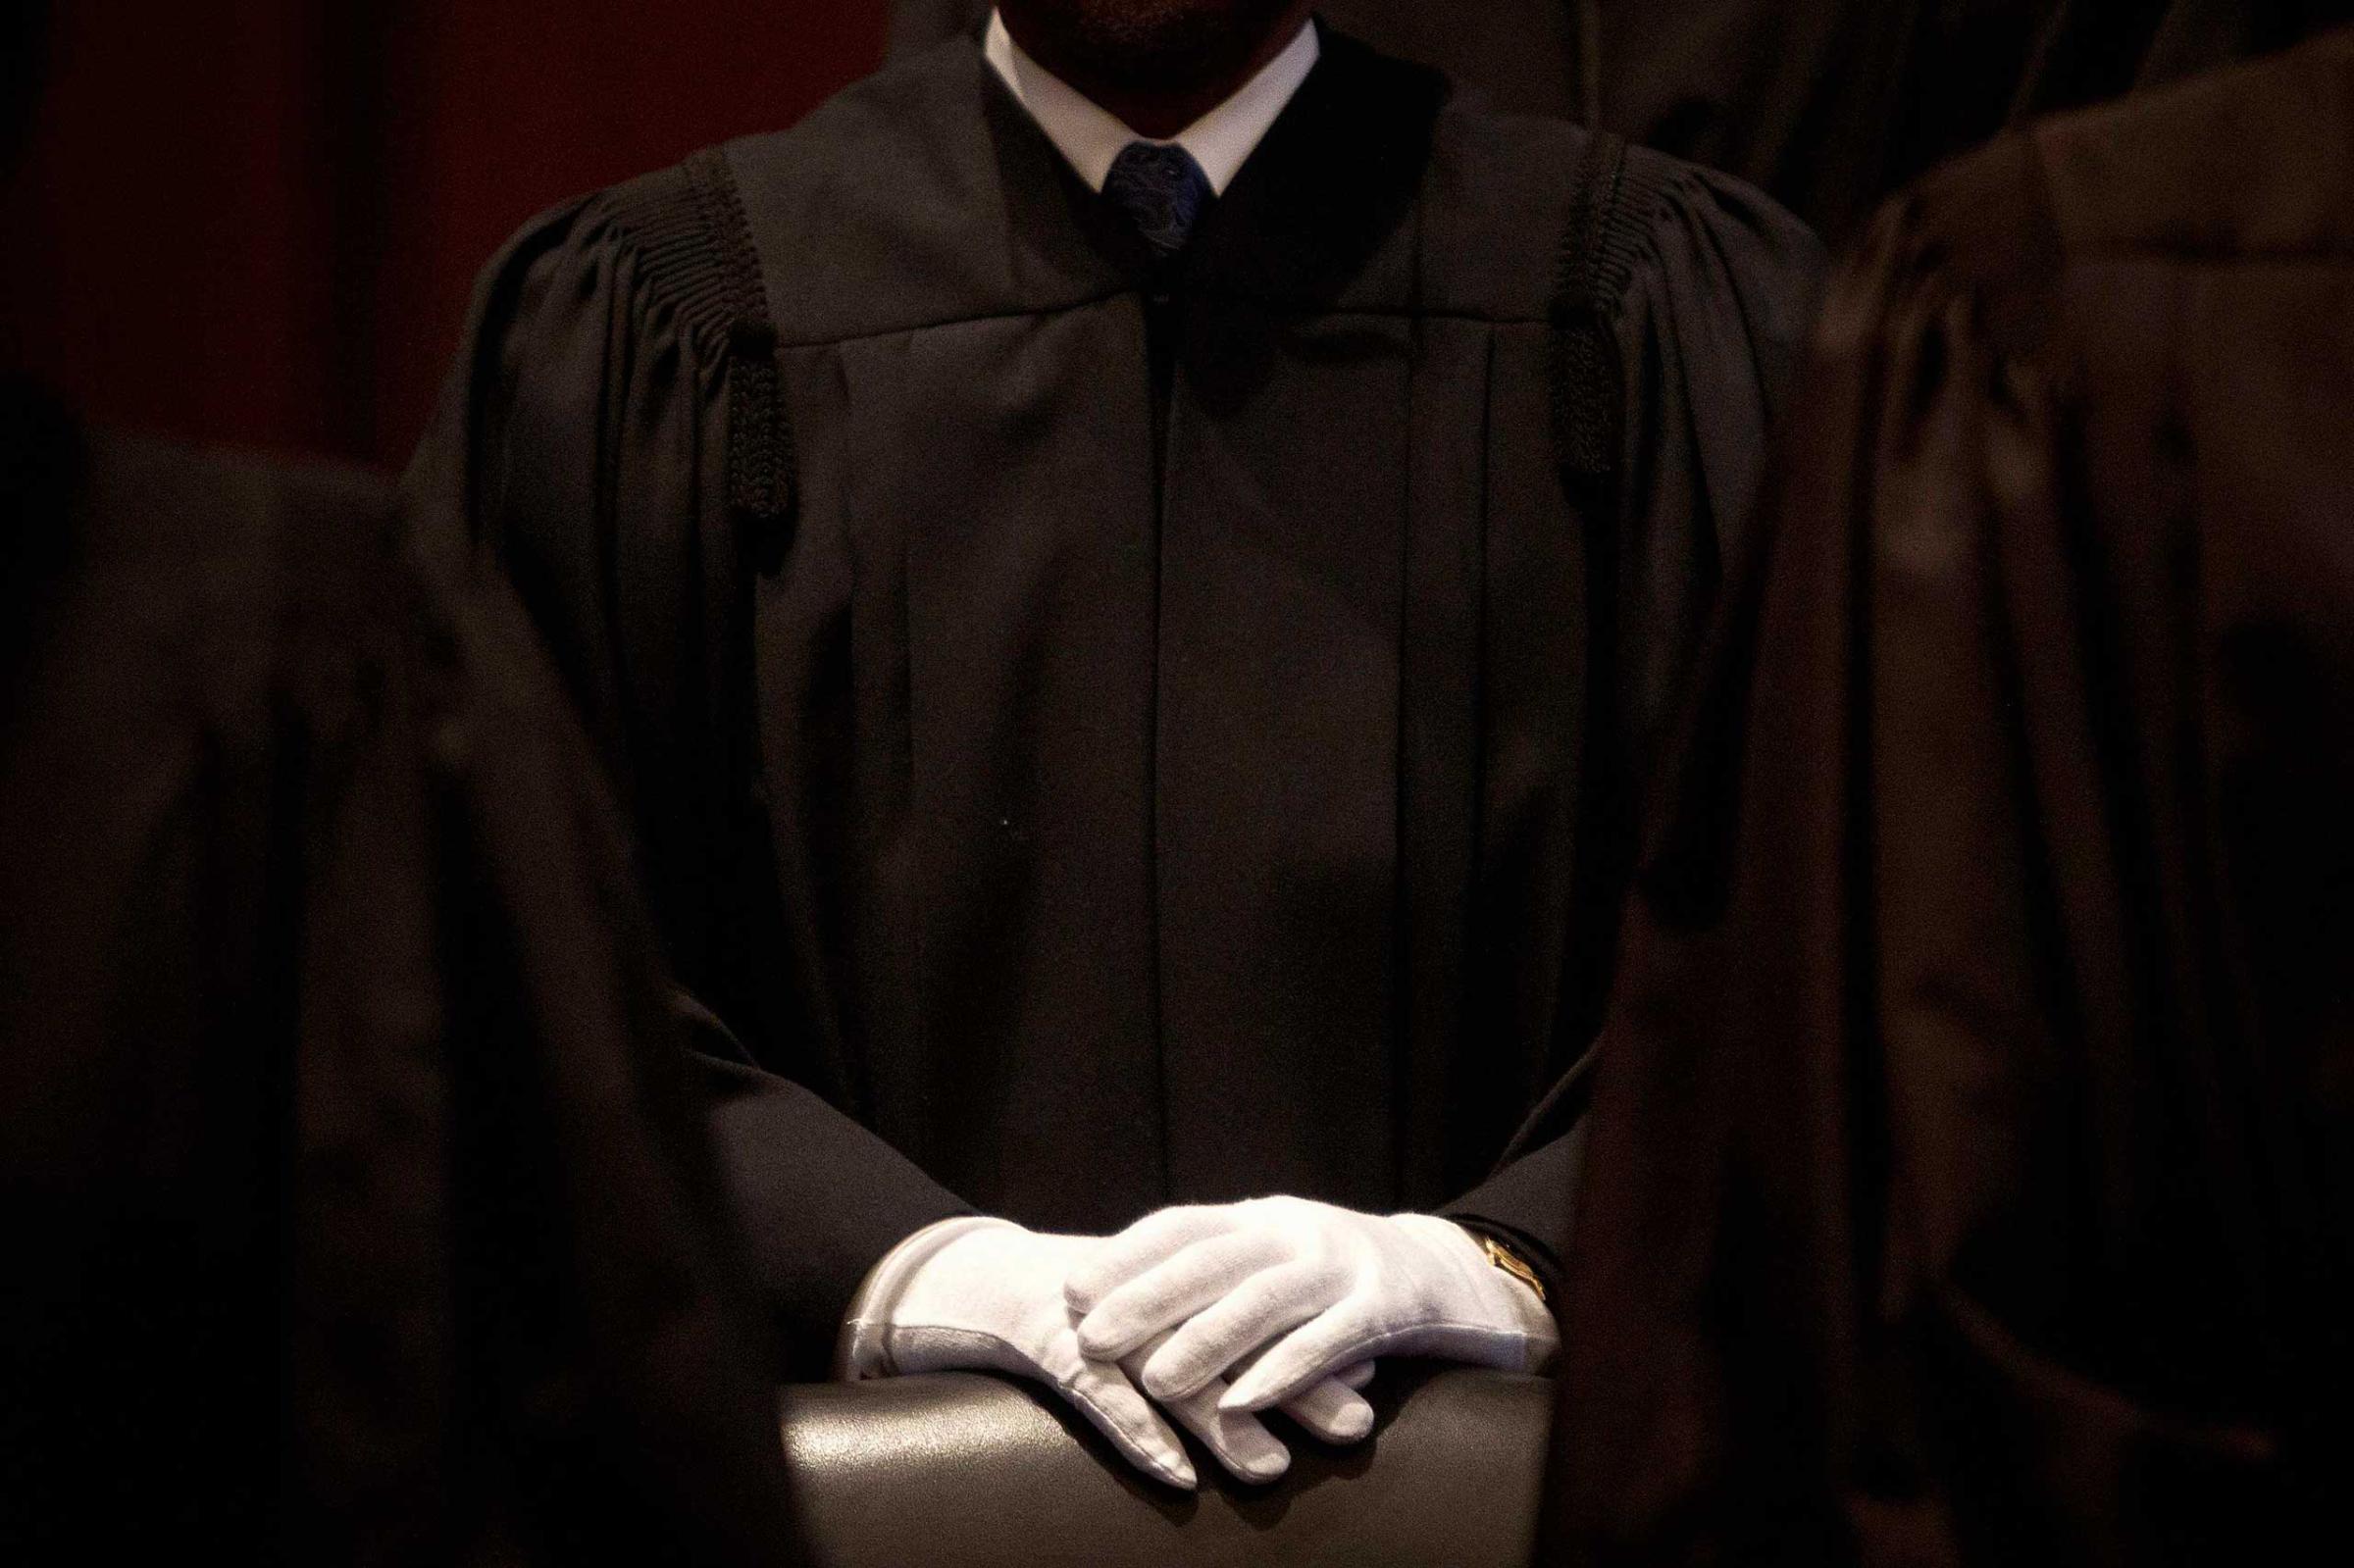 A judge stands before a special session of the United States District Court for the Southern District of New York on the occasion of the 225th anniversary of its first session in New York